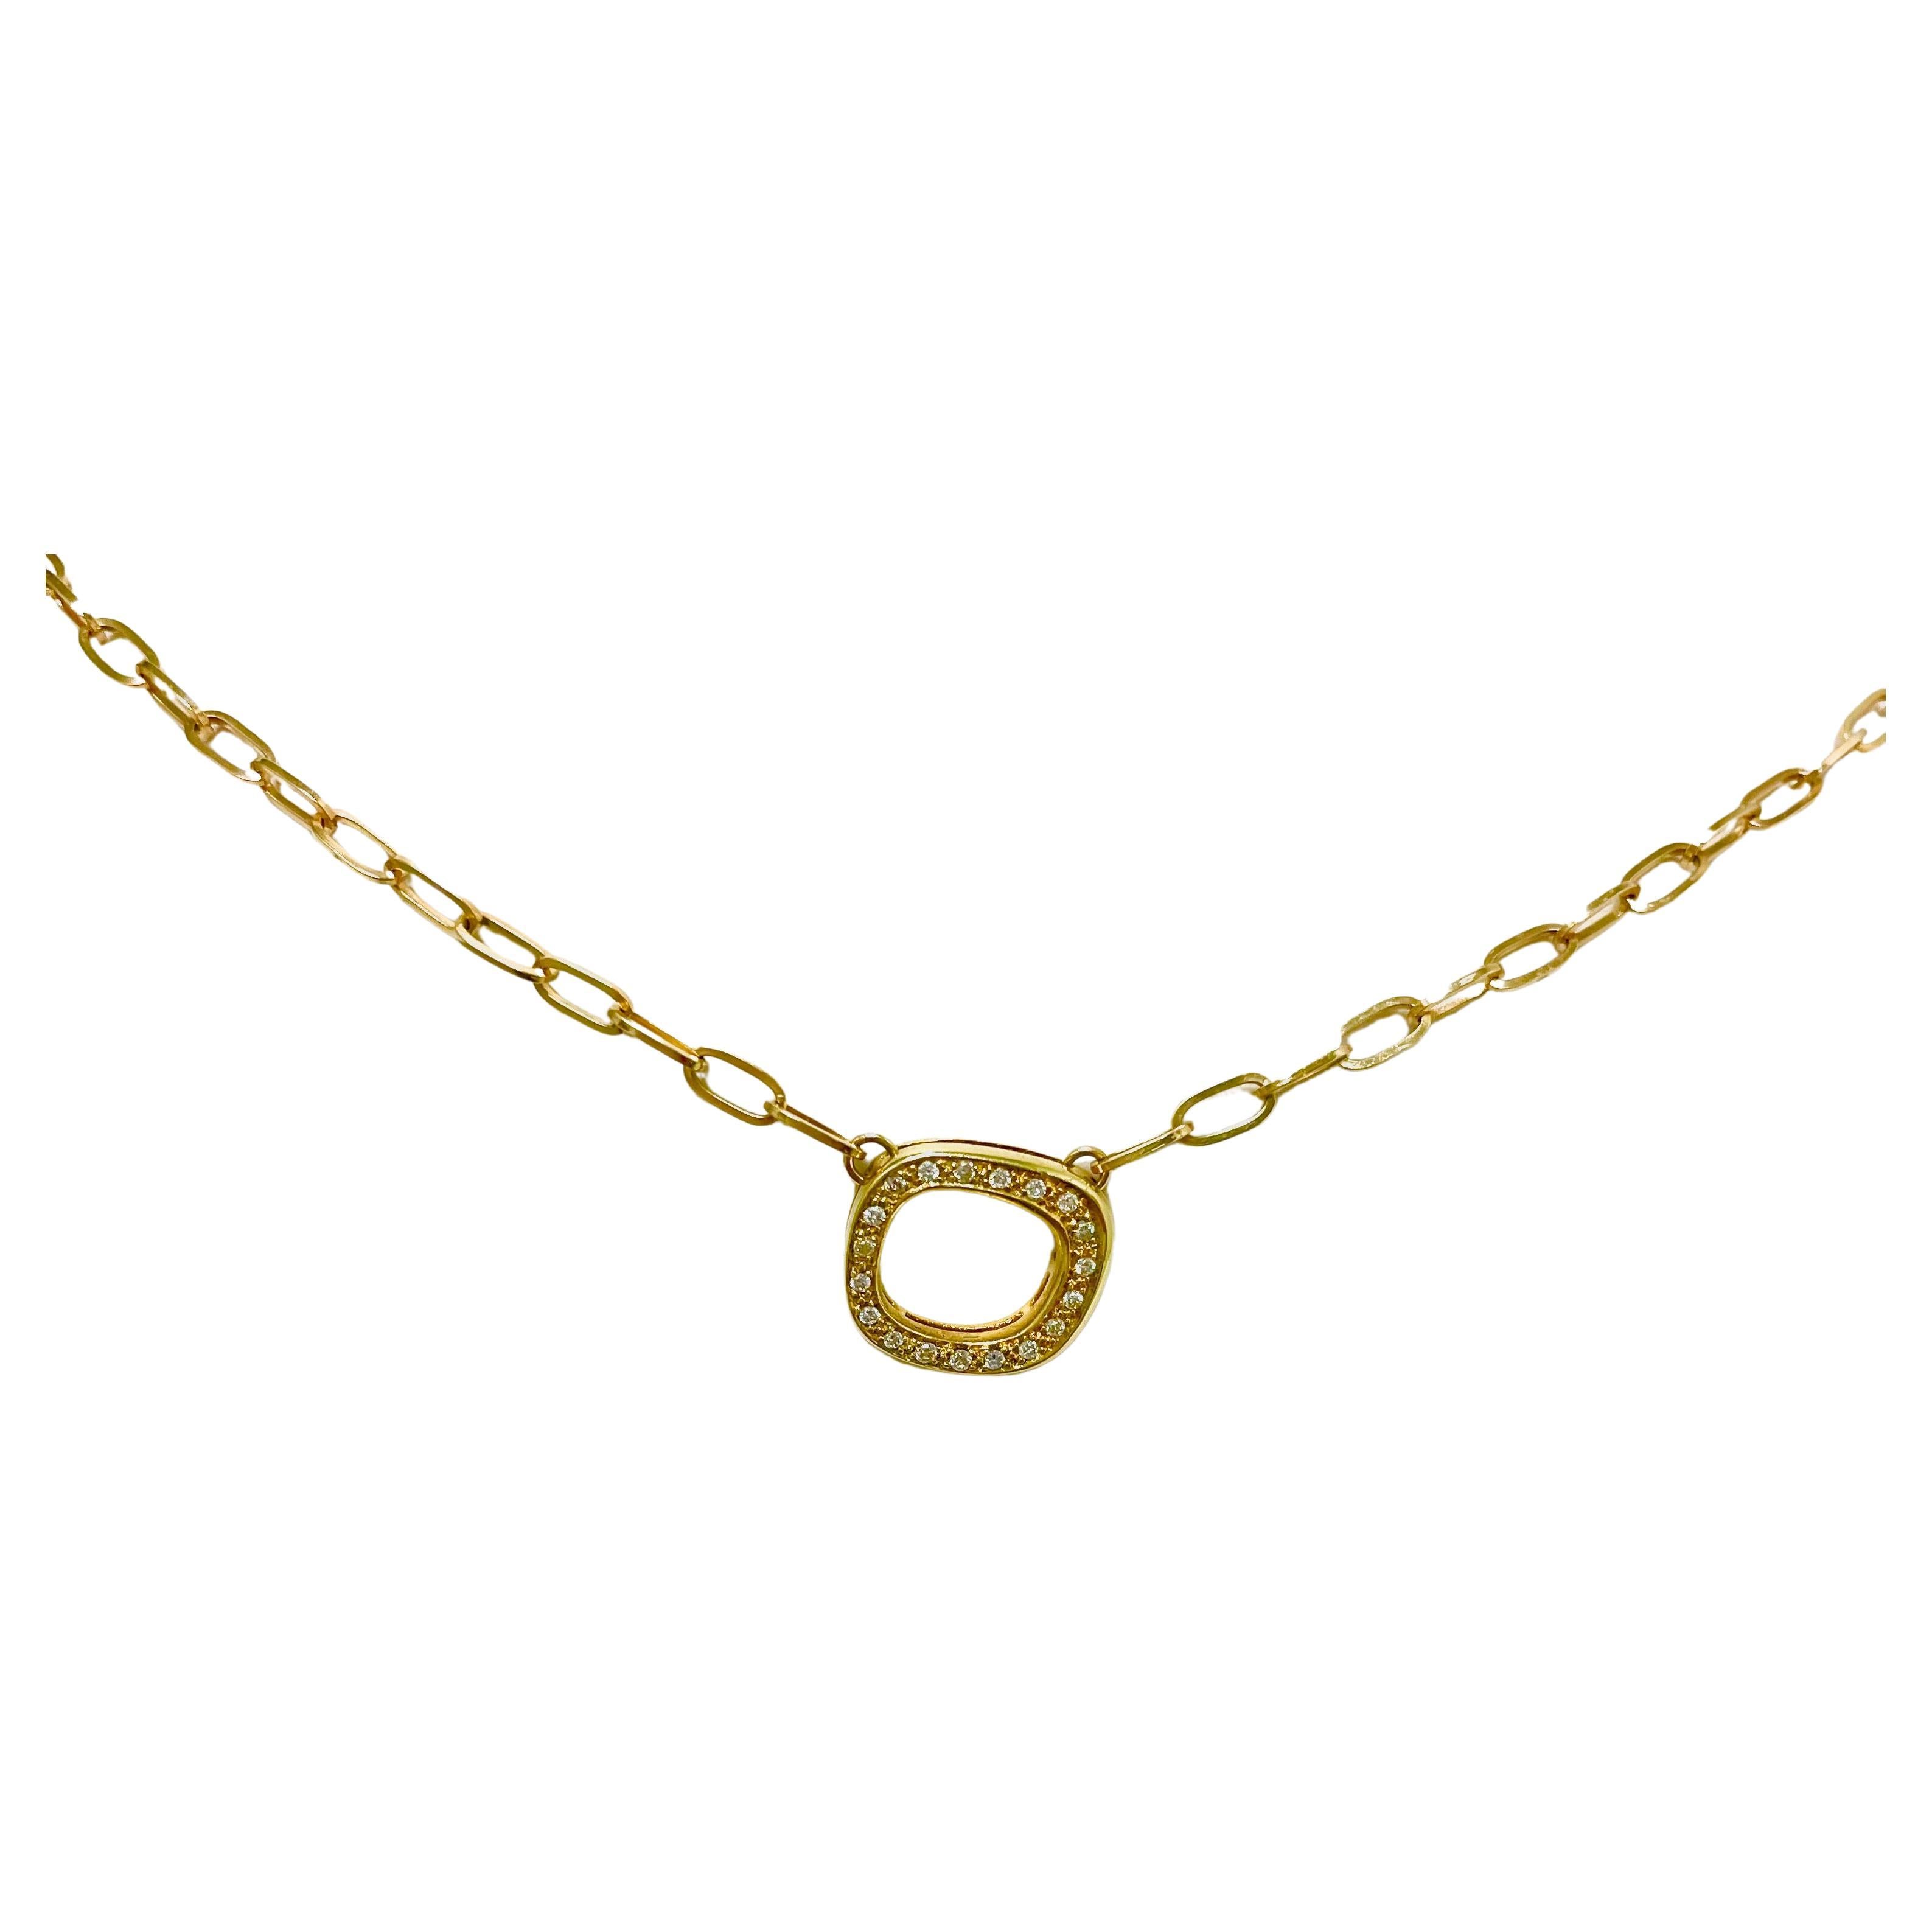 Pave Diamond Pendant with Gold Chain Necklace 1